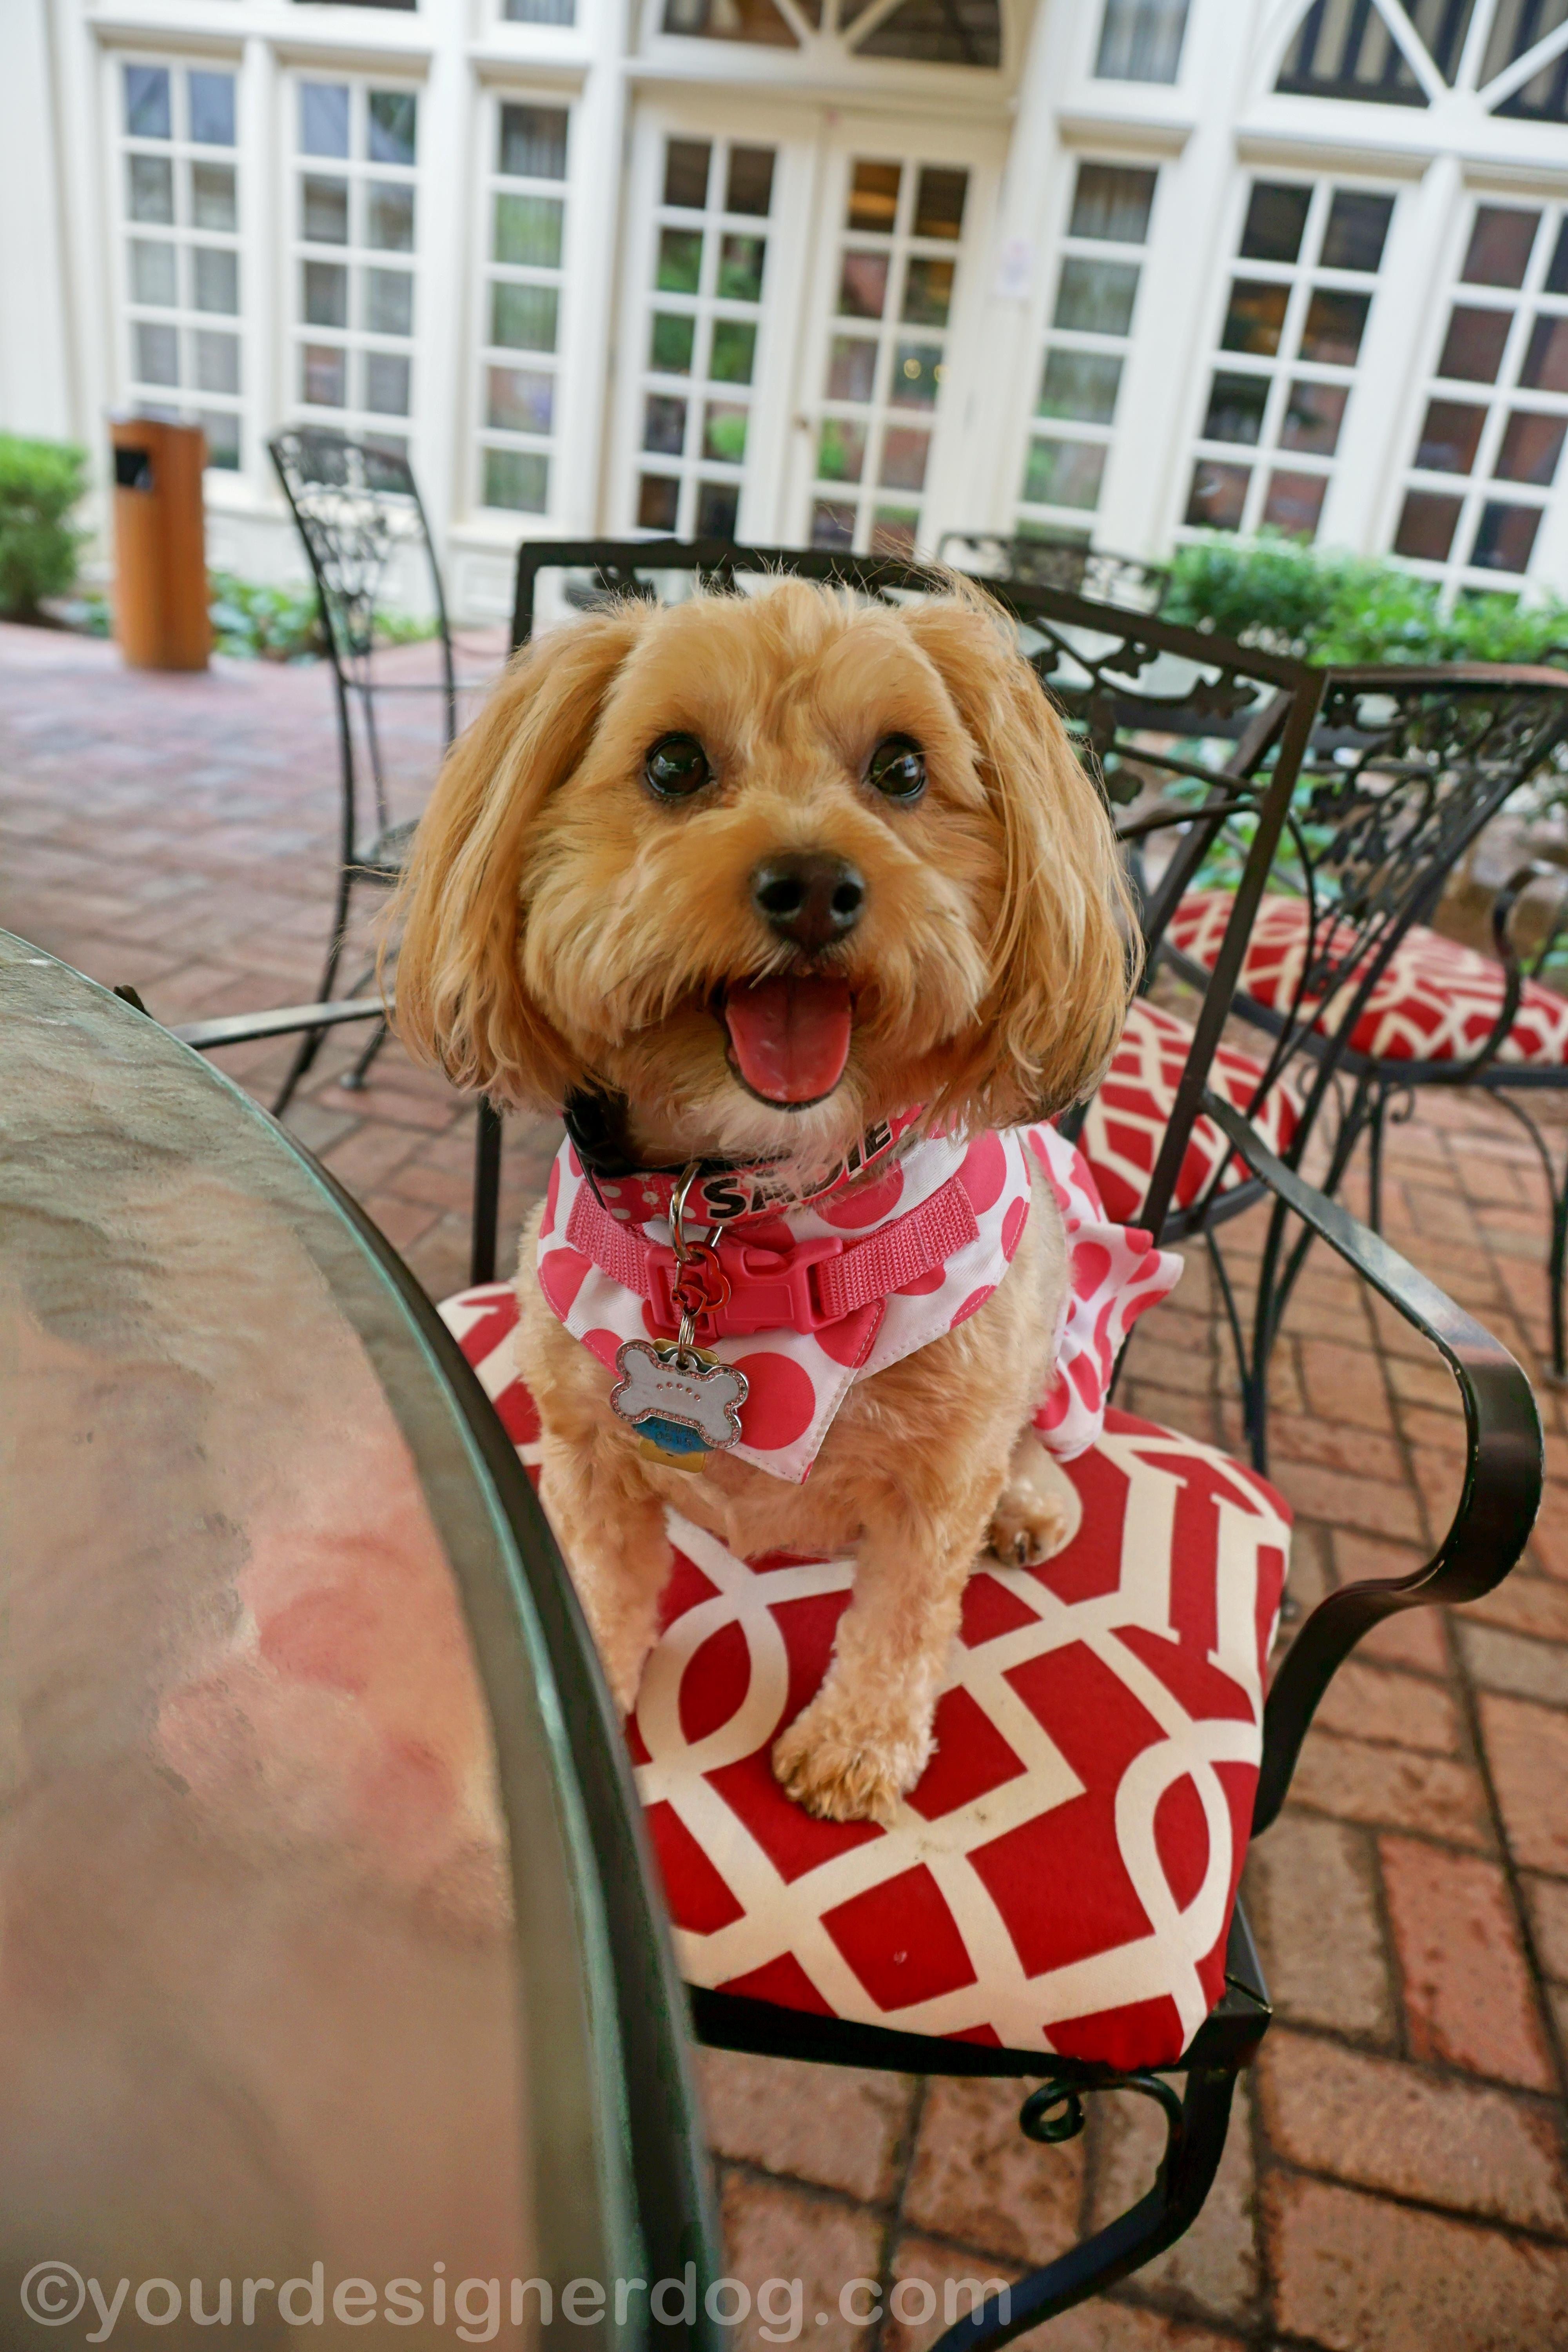 dogs, designer dogs, yorkipoo, yorkie poo, dog friendly dining, outdoor dining